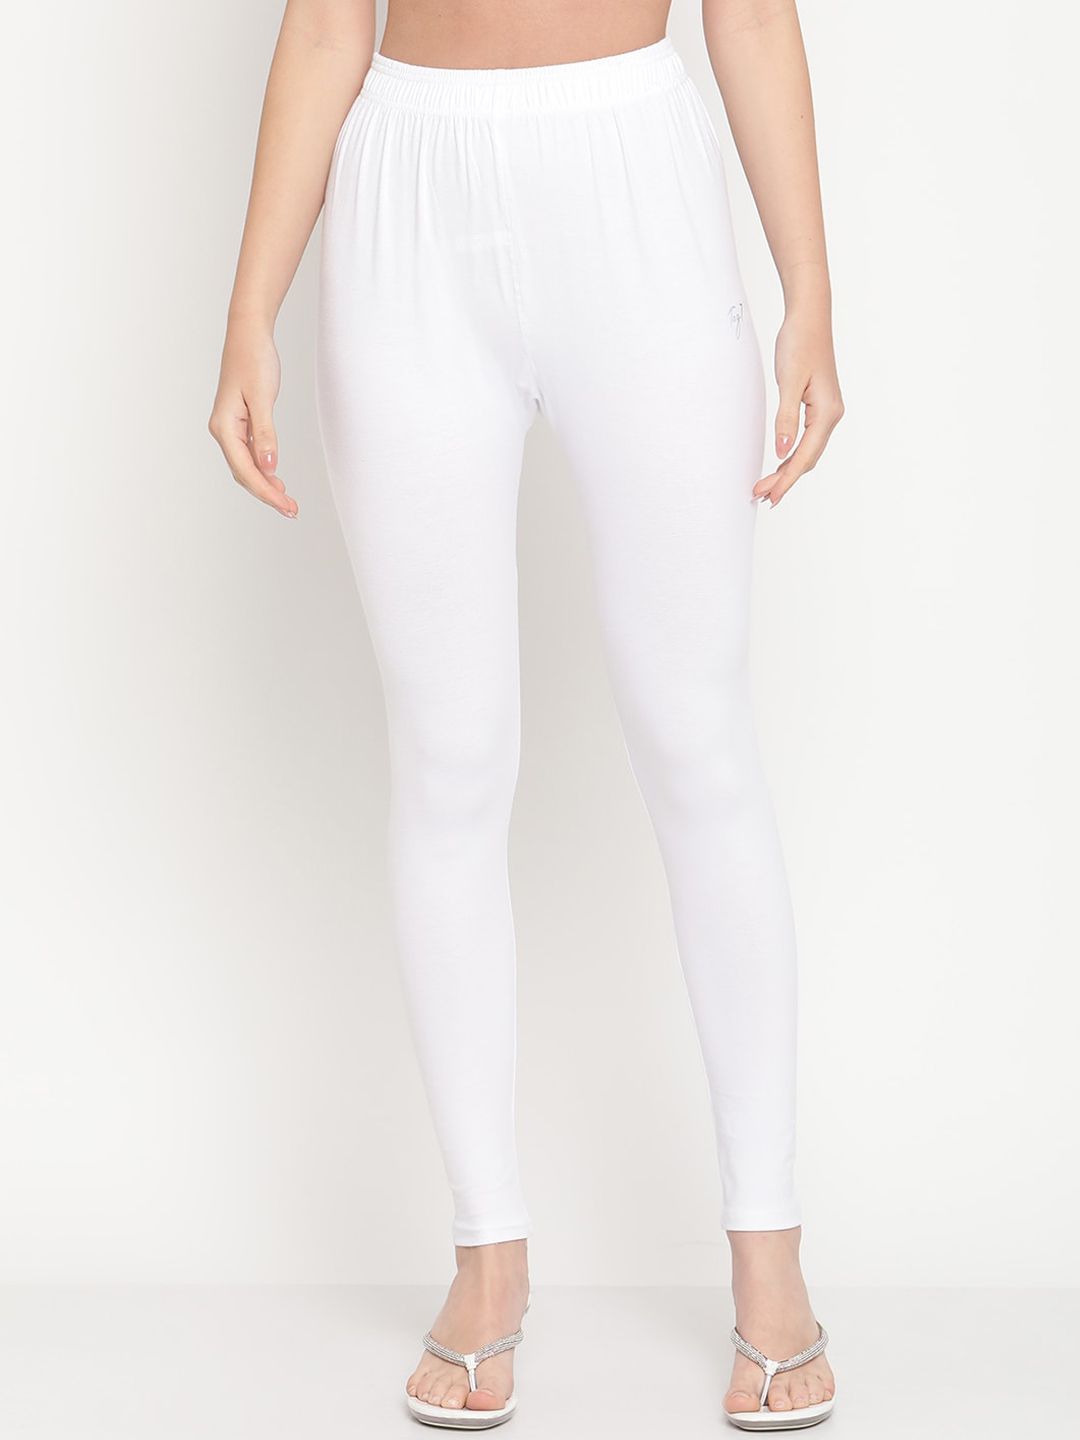 TAG 7 Women White Solid Comfort Fit Ankle Length Leggings Price in India